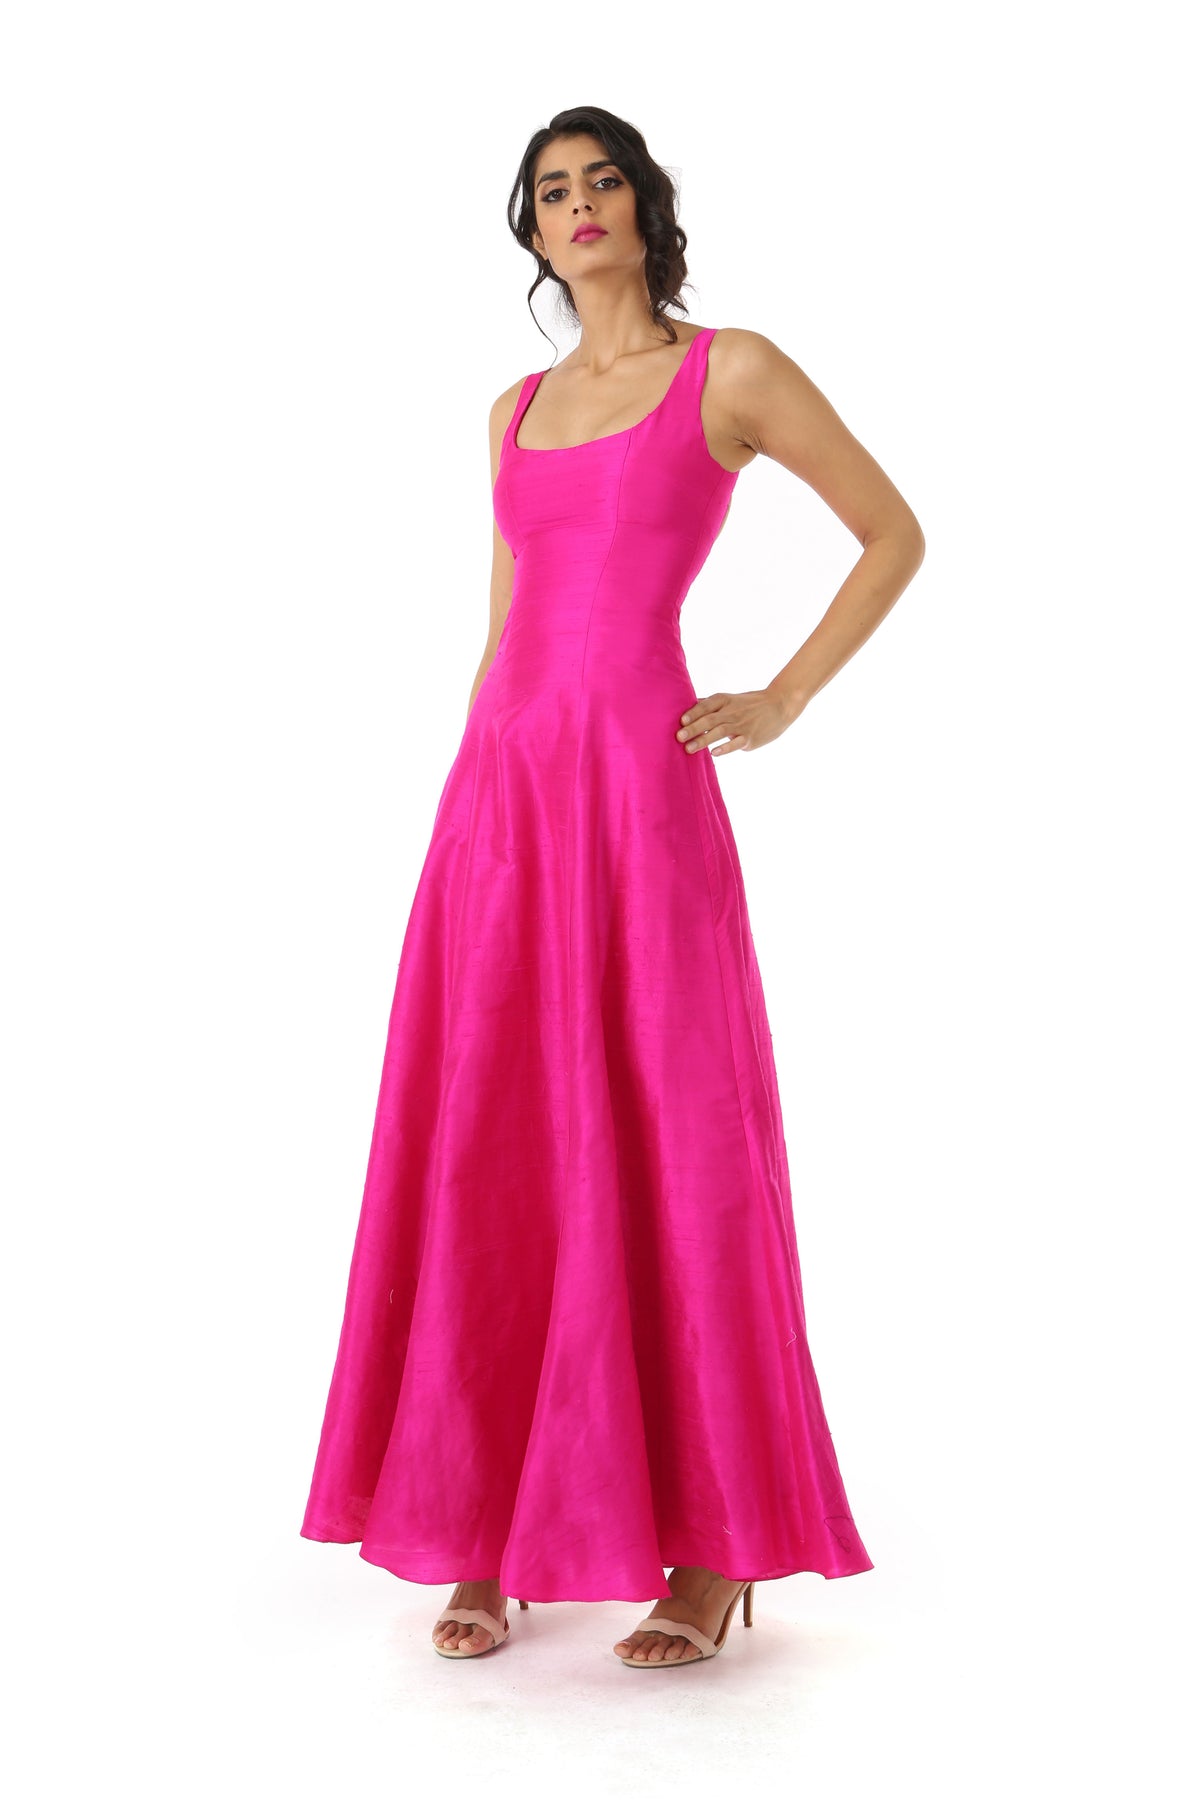 Harleen Kaur Mansi Fuchsia Silk Dress with Open Back and Scoopneck - Front View